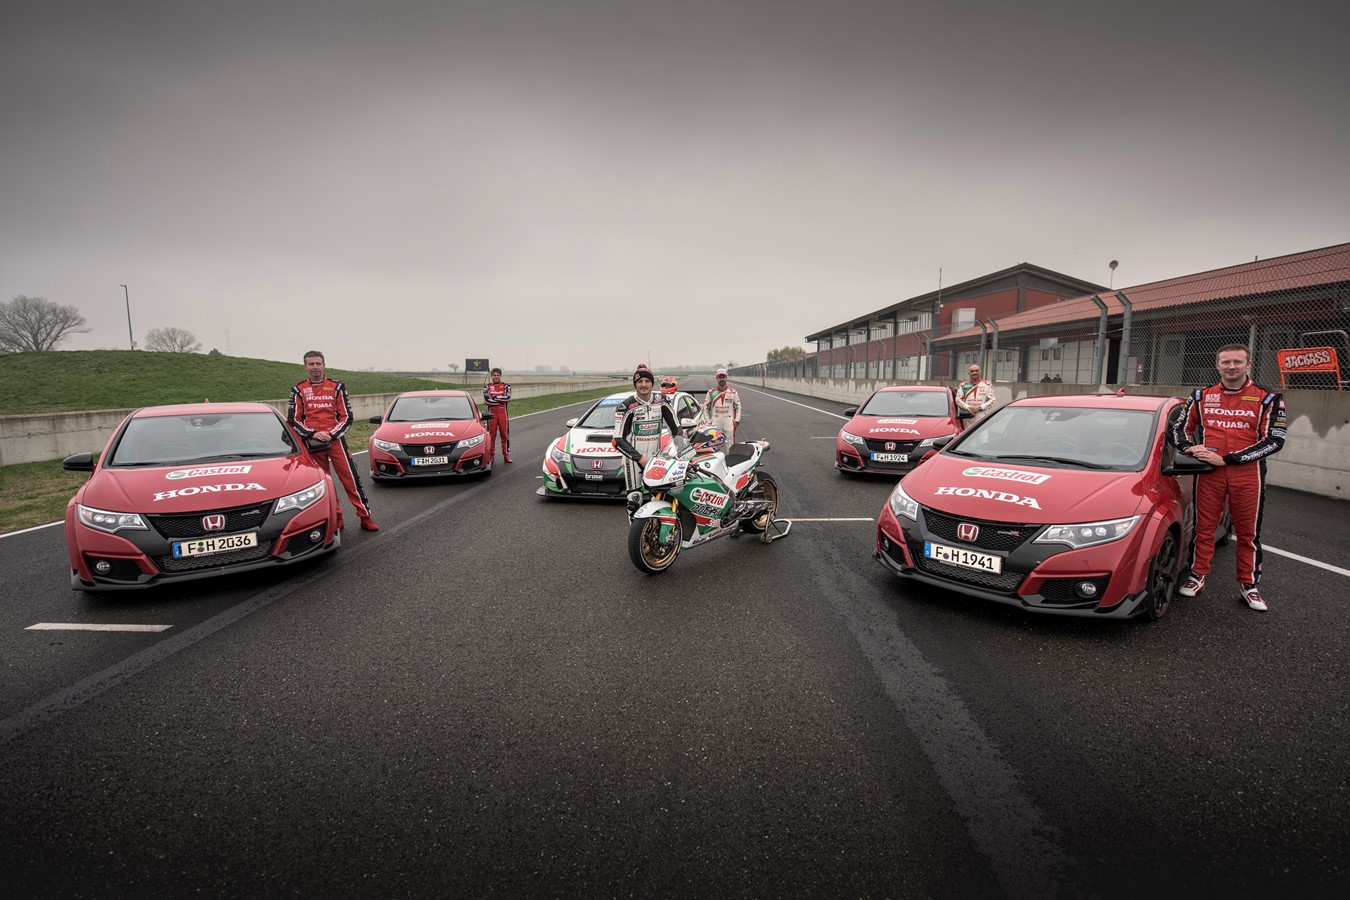 Honda demonstrates Civic Type R's race pedigree in a celebration of two and four wheels